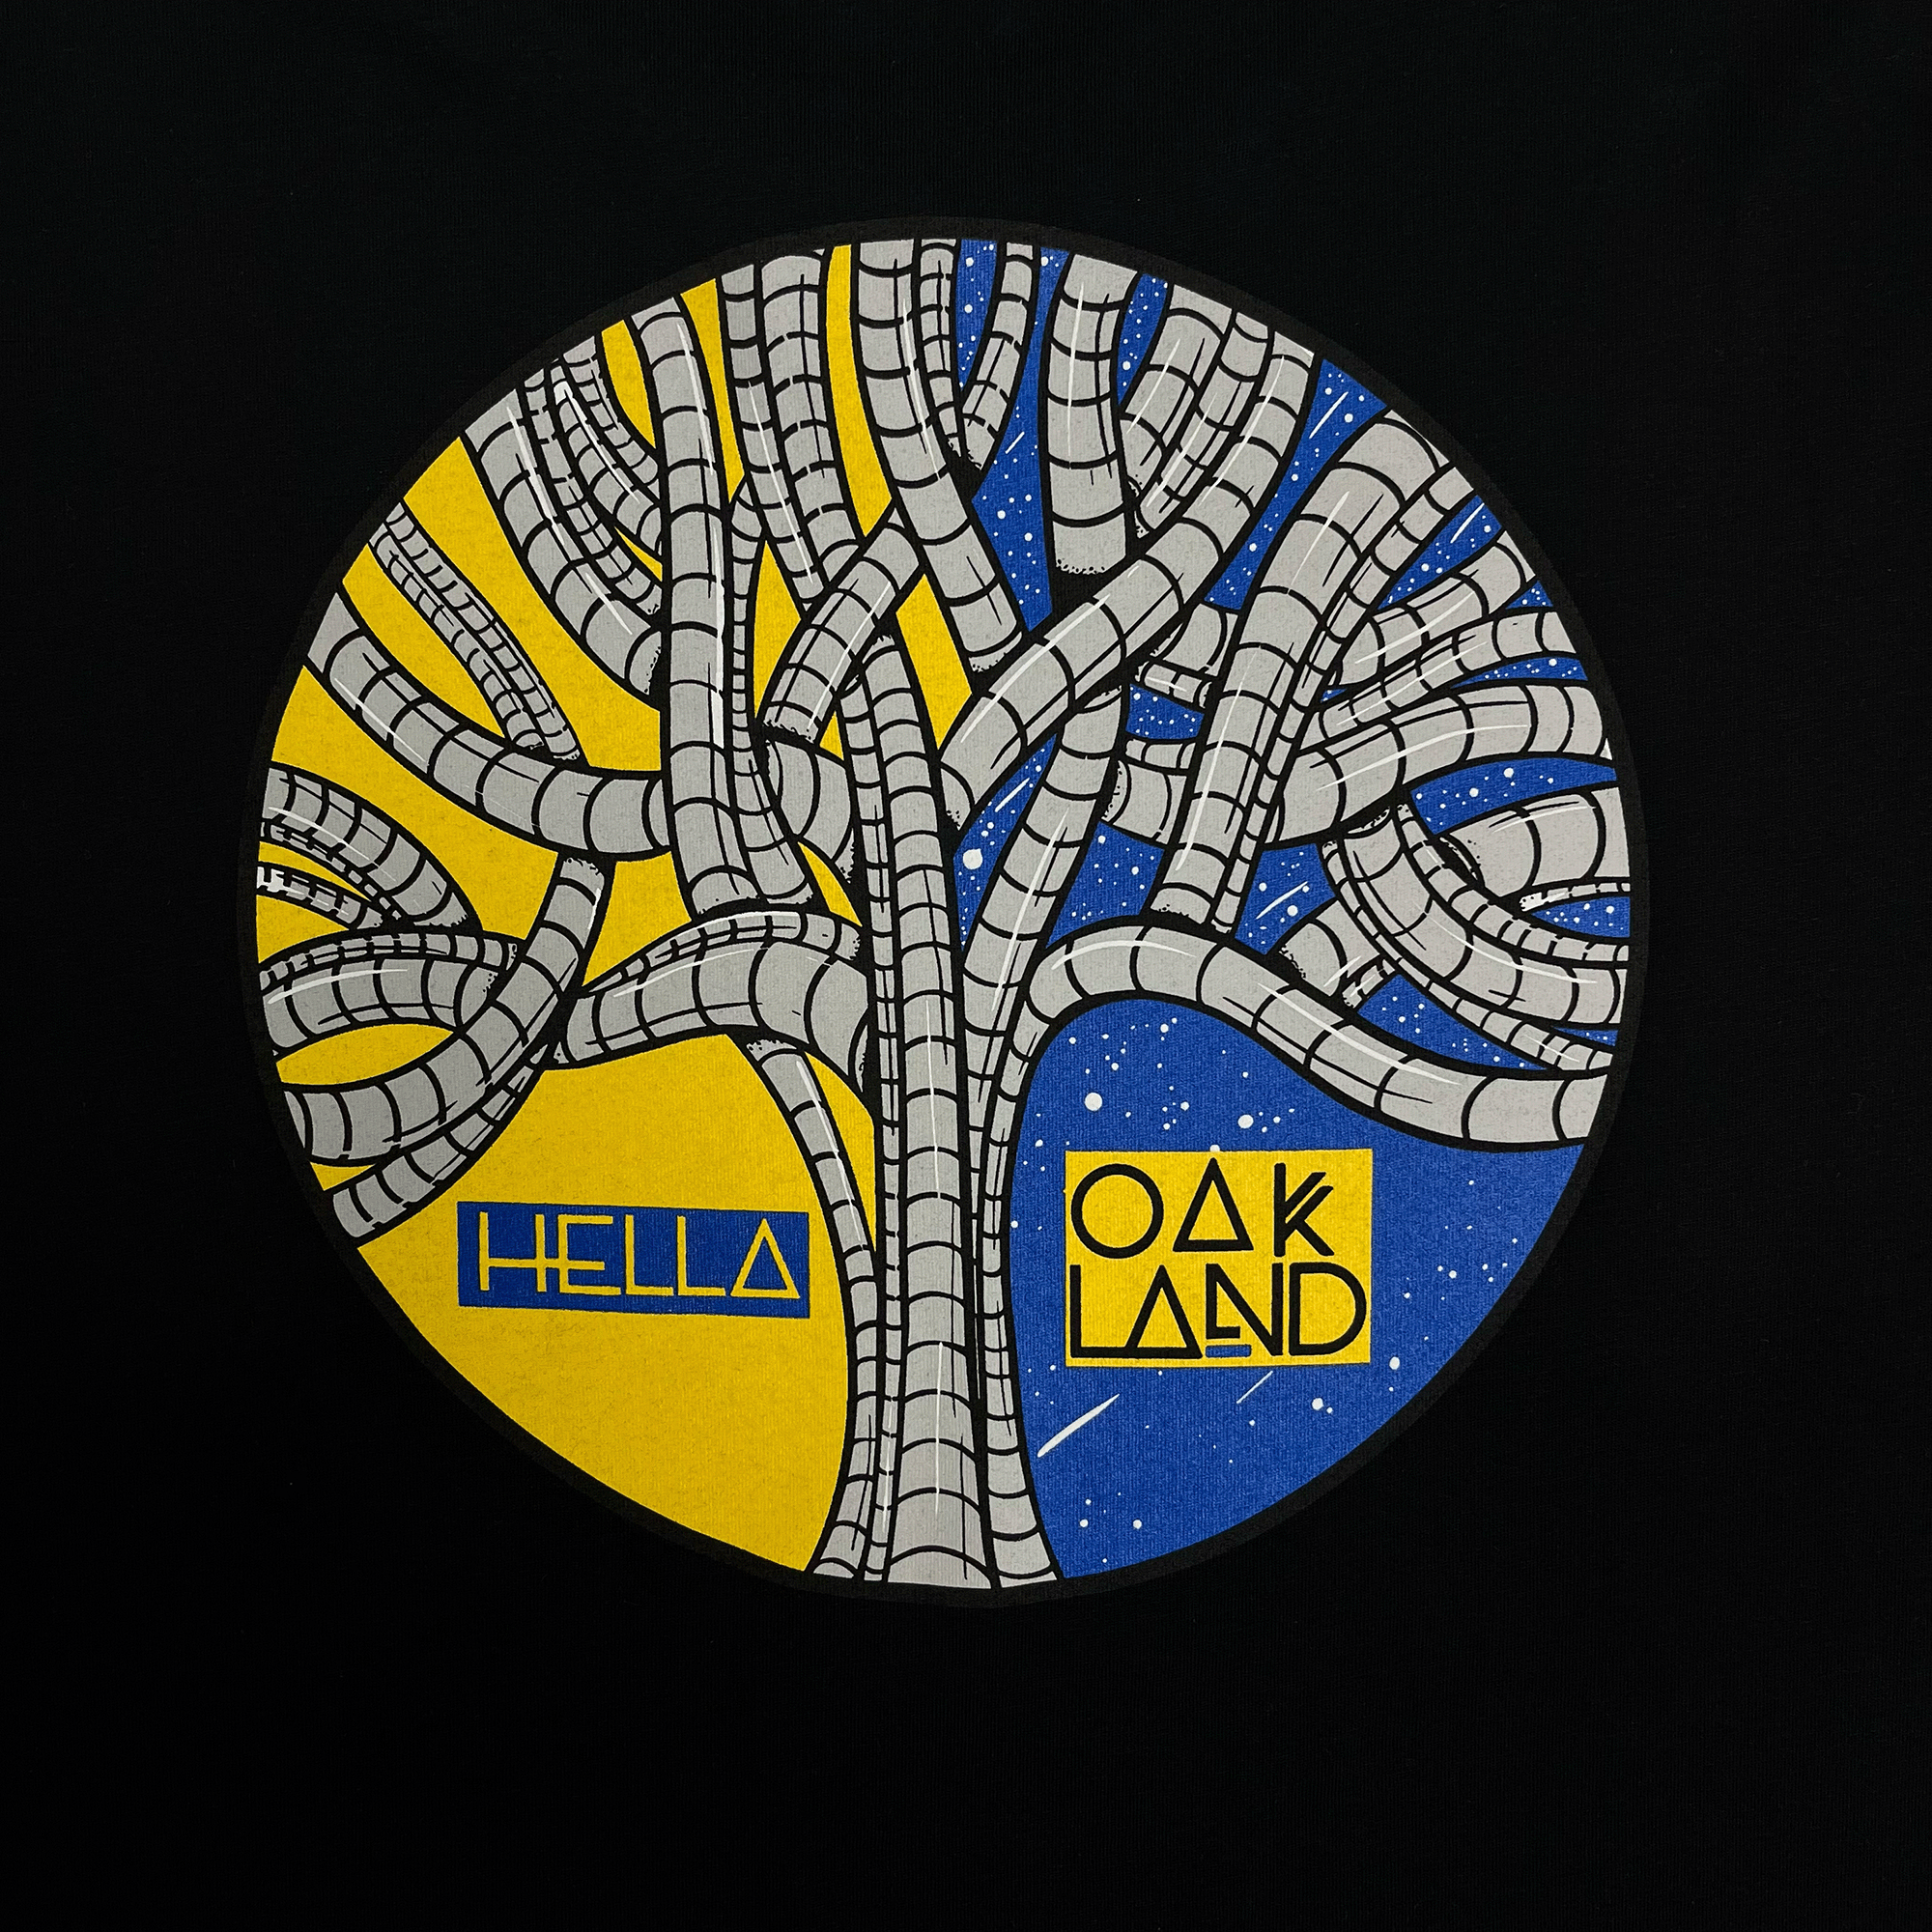 Close-up of blue, yellow, and grey HELLA OAKLAND circular tree graphic by artist HellaFutures on a black t-shirt.